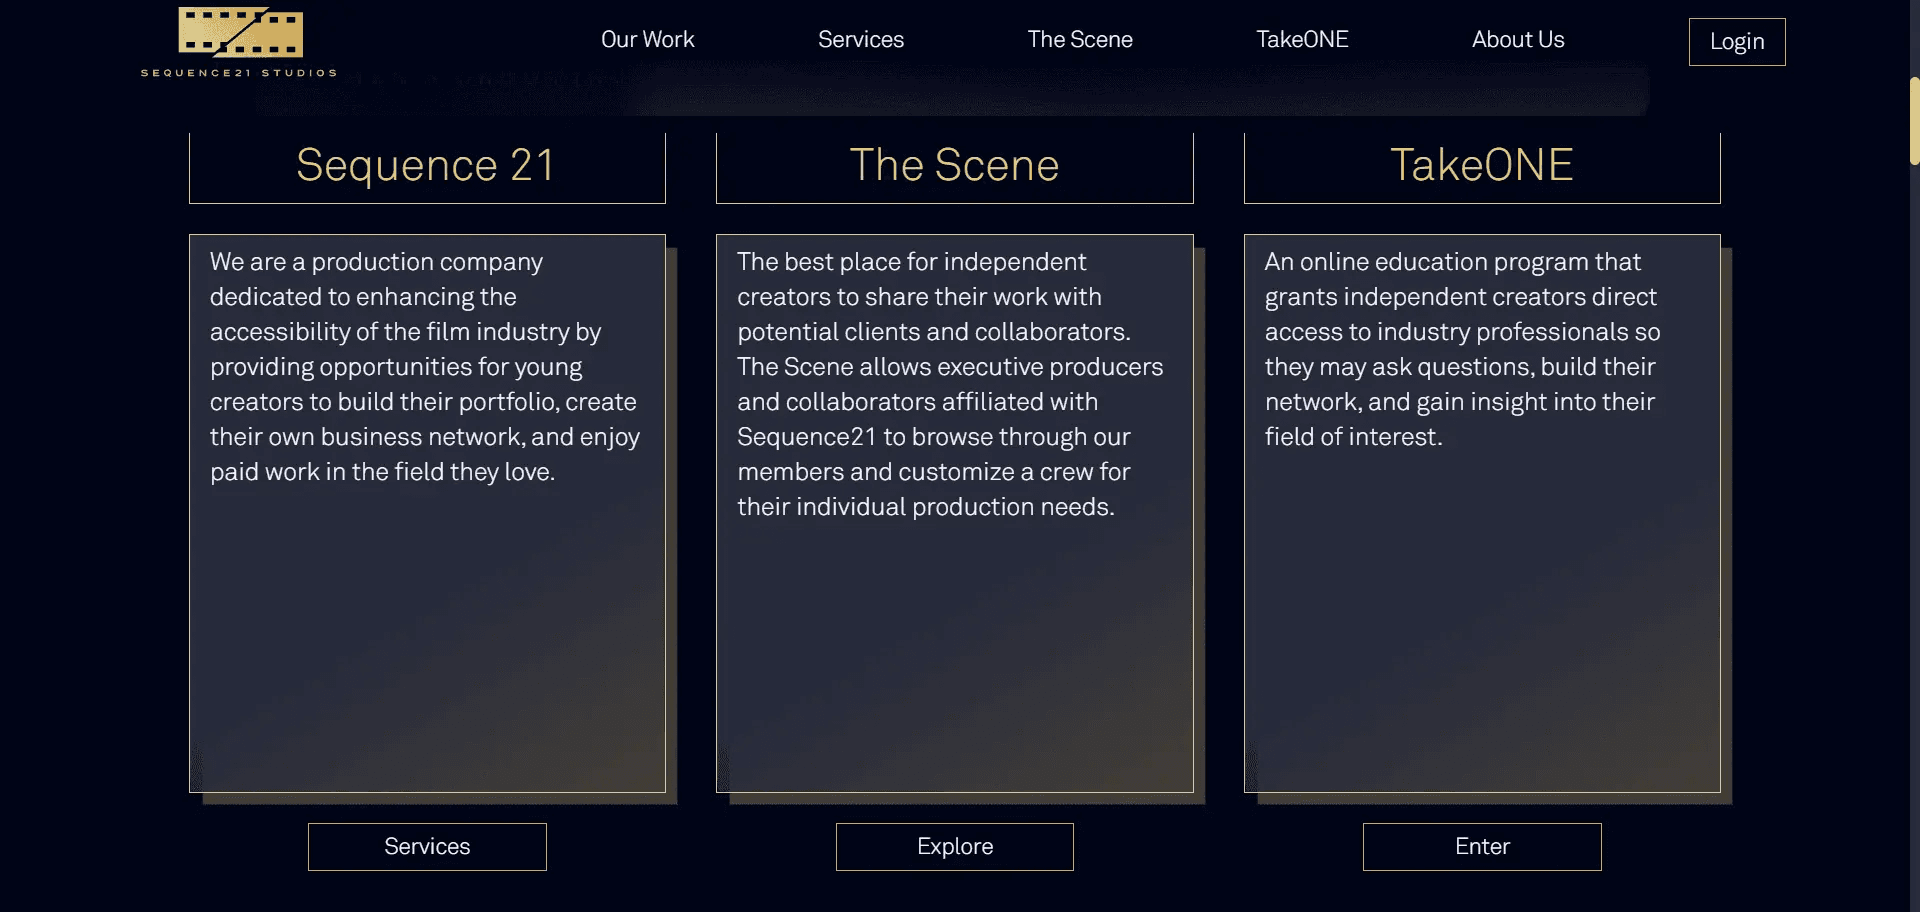 Items representing 'Sequence21', 'The Scene', and 'TakeONE' are displayed on the homepage